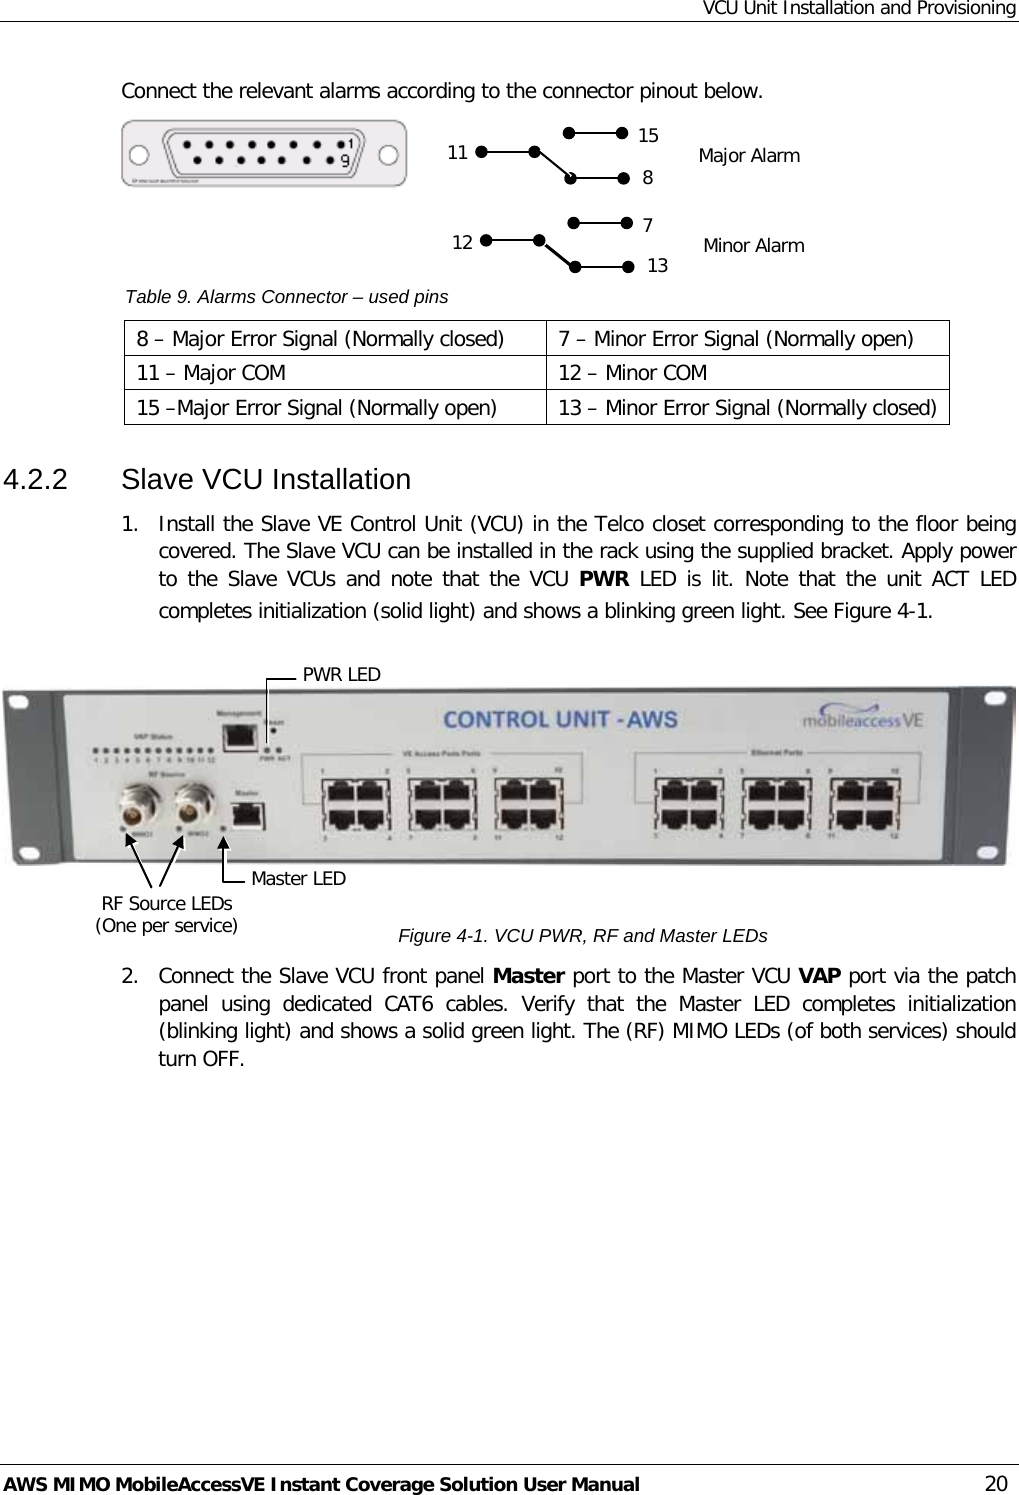 VCU Unit Installation and Provisioning AWS MIMO MobileAccessVE Instant Coverage Solution User Manual  20 Connect the relevant alarms according to the connector pinout below.     Table 9. Alarms Connector – used pins 8 – Major Error Signal (Normally closed) 7 – Minor Error Signal (Normally open) 11 – Major COM  12 – Minor COM 15 –Major Error Signal (Normally open) 13 – Minor Error Signal (Normally closed) 4.2.2  Slave VCU Installation 1.  Install the Slave VE Control Unit (VCU) in the Telco closet corresponding to the floor being covered. The Slave VCU can be installed in the rack using the supplied bracket. Apply power to the Slave VCUs and note that the VCU PWR LED is lit.  Note that the unit ACT LED completes initialization (solid light) and shows a blinking green light. See Figure  4-1.          Figure  4-1. VCU PWR, RF and Master LEDs 2.  Connect the Slave VCU front panel Master port to the Master VCU VAP port via the patch panel  using dedicated CAT6 cables. Verify that the Master LED completes initialization (blinking light) and shows a solid green light. The (RF) MIMO LEDs (of both services) should turn OFF.  11 15 8  Major Alarm 12 7 13 Minor Alarm PWR LED   Master LED  RF Source LEDs  (One per service) 